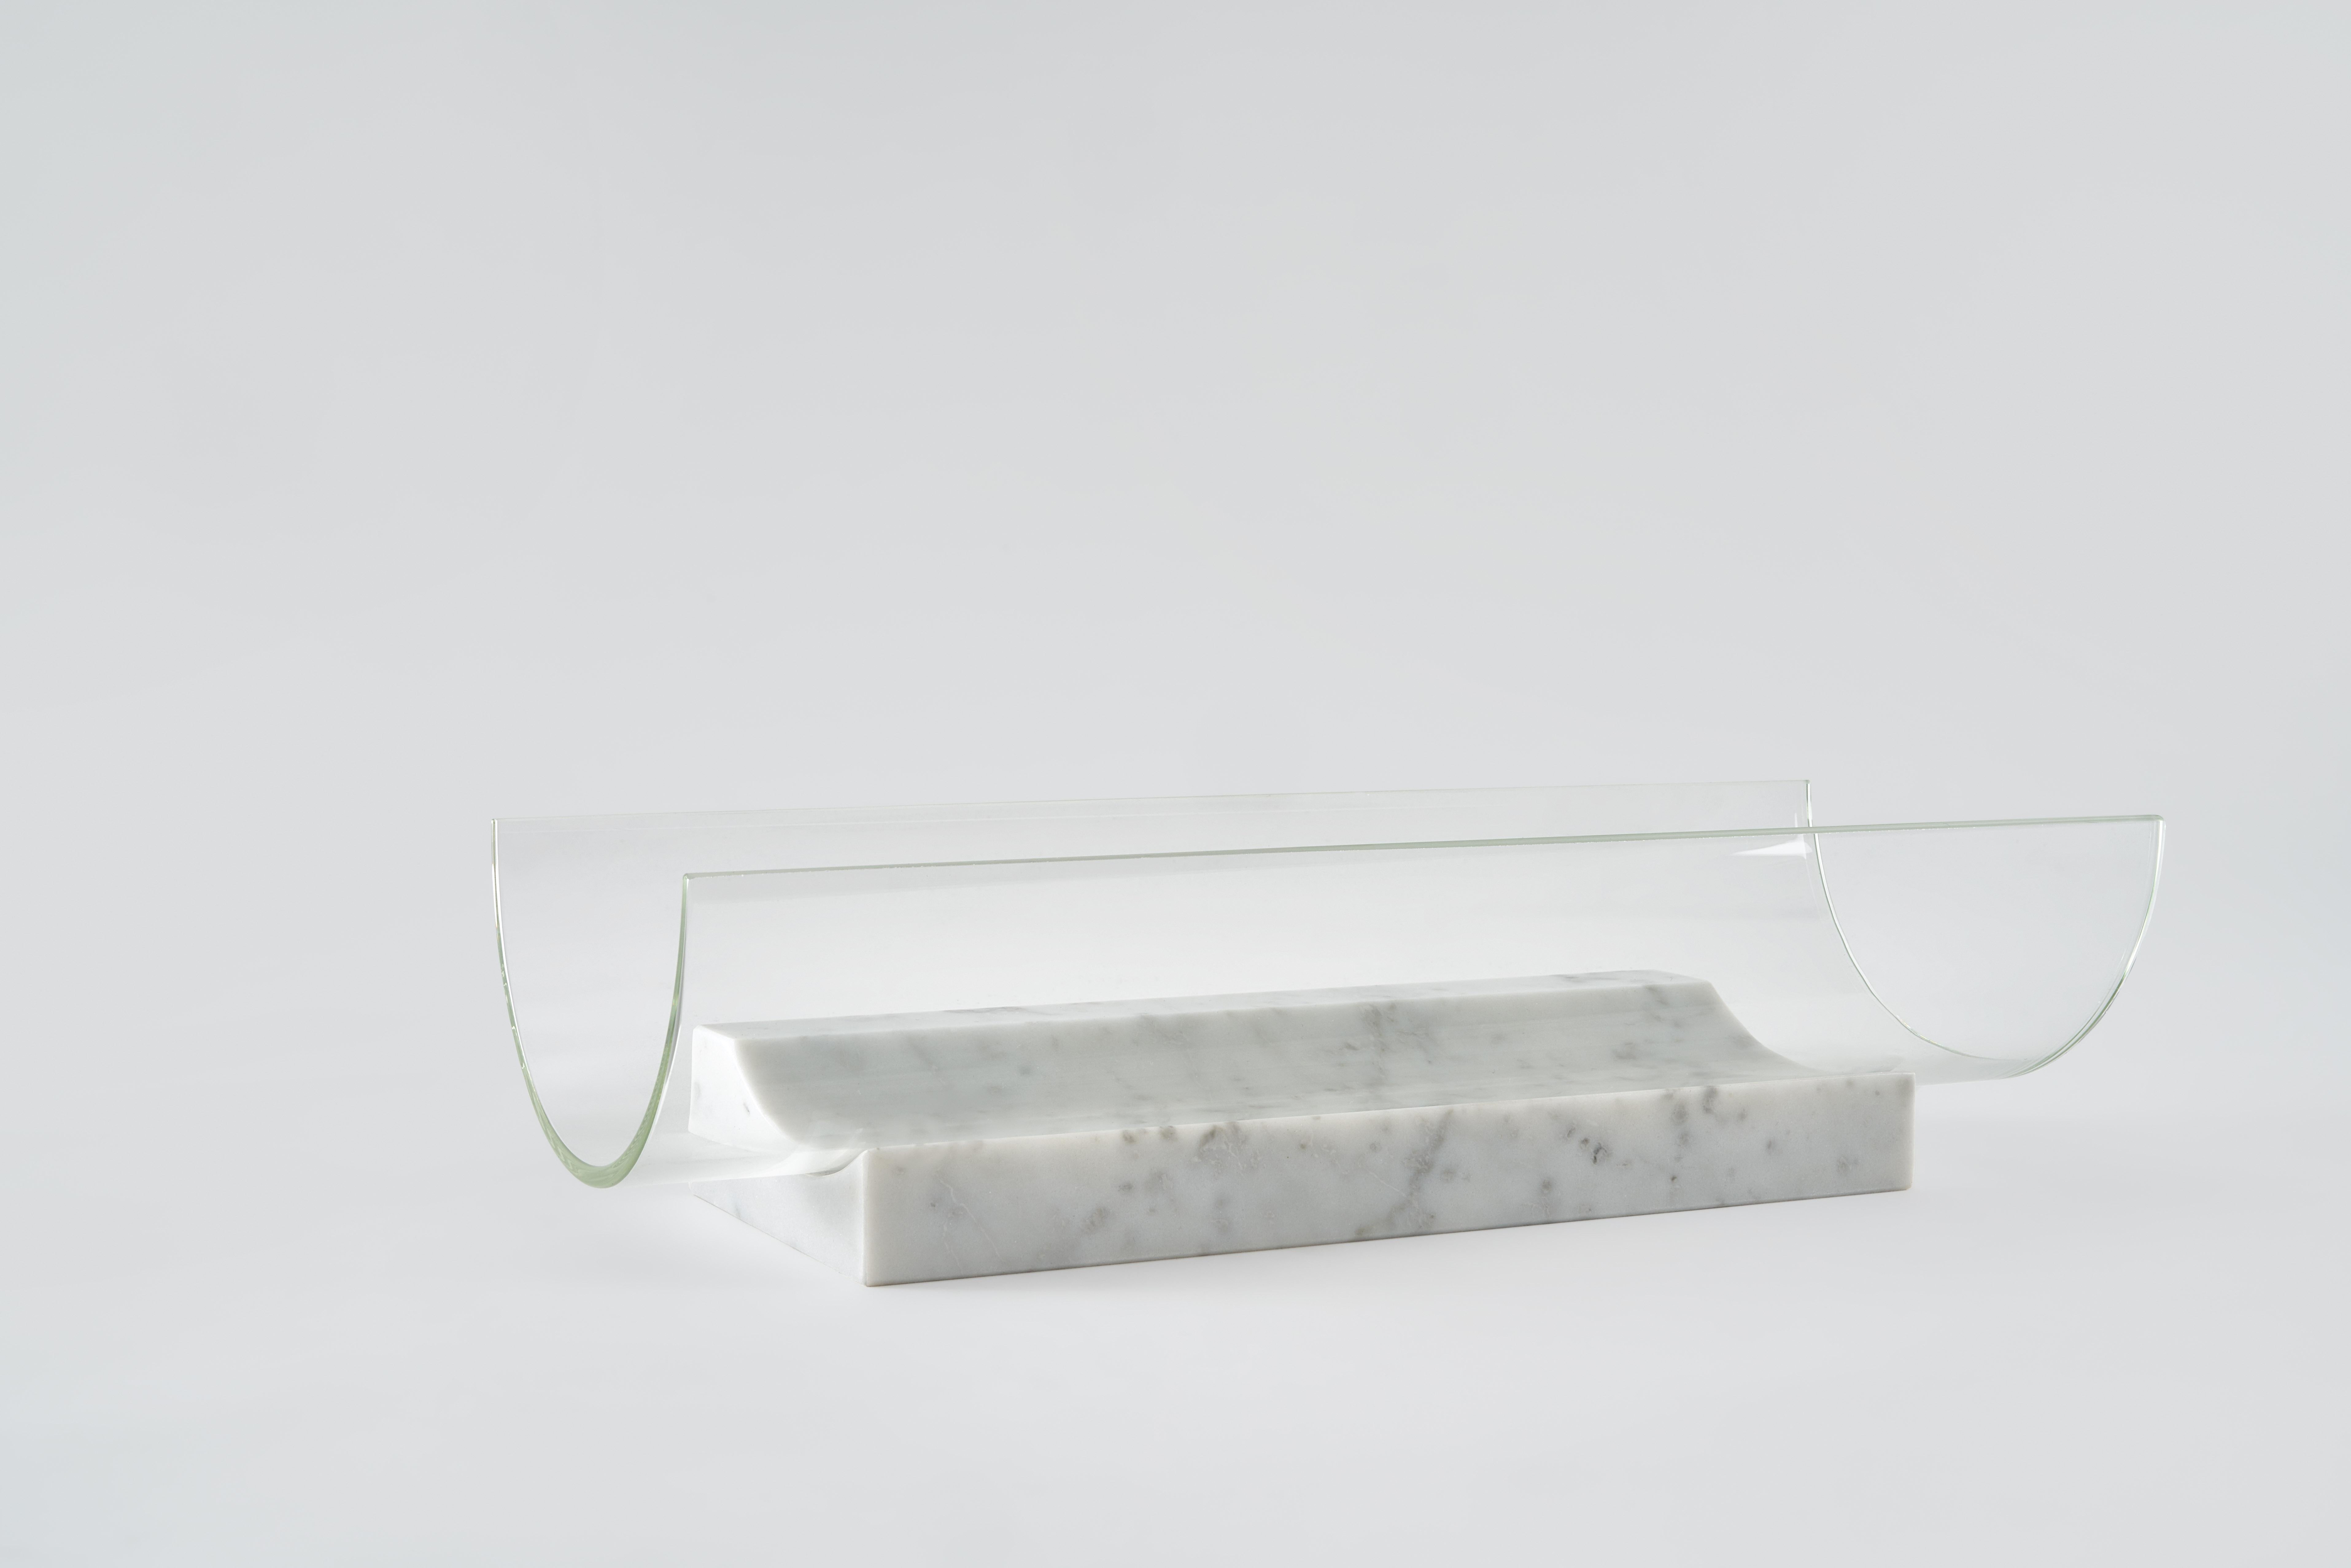 Long Segno bowl - Giorgio Bonaguro.
Dimensions: D 38 x W 15 x H 11 cm.
Materials: white carrara marble, glass.

A collection that was born from the desire to recover marble processing waste: small portions of slabs with different thickness,